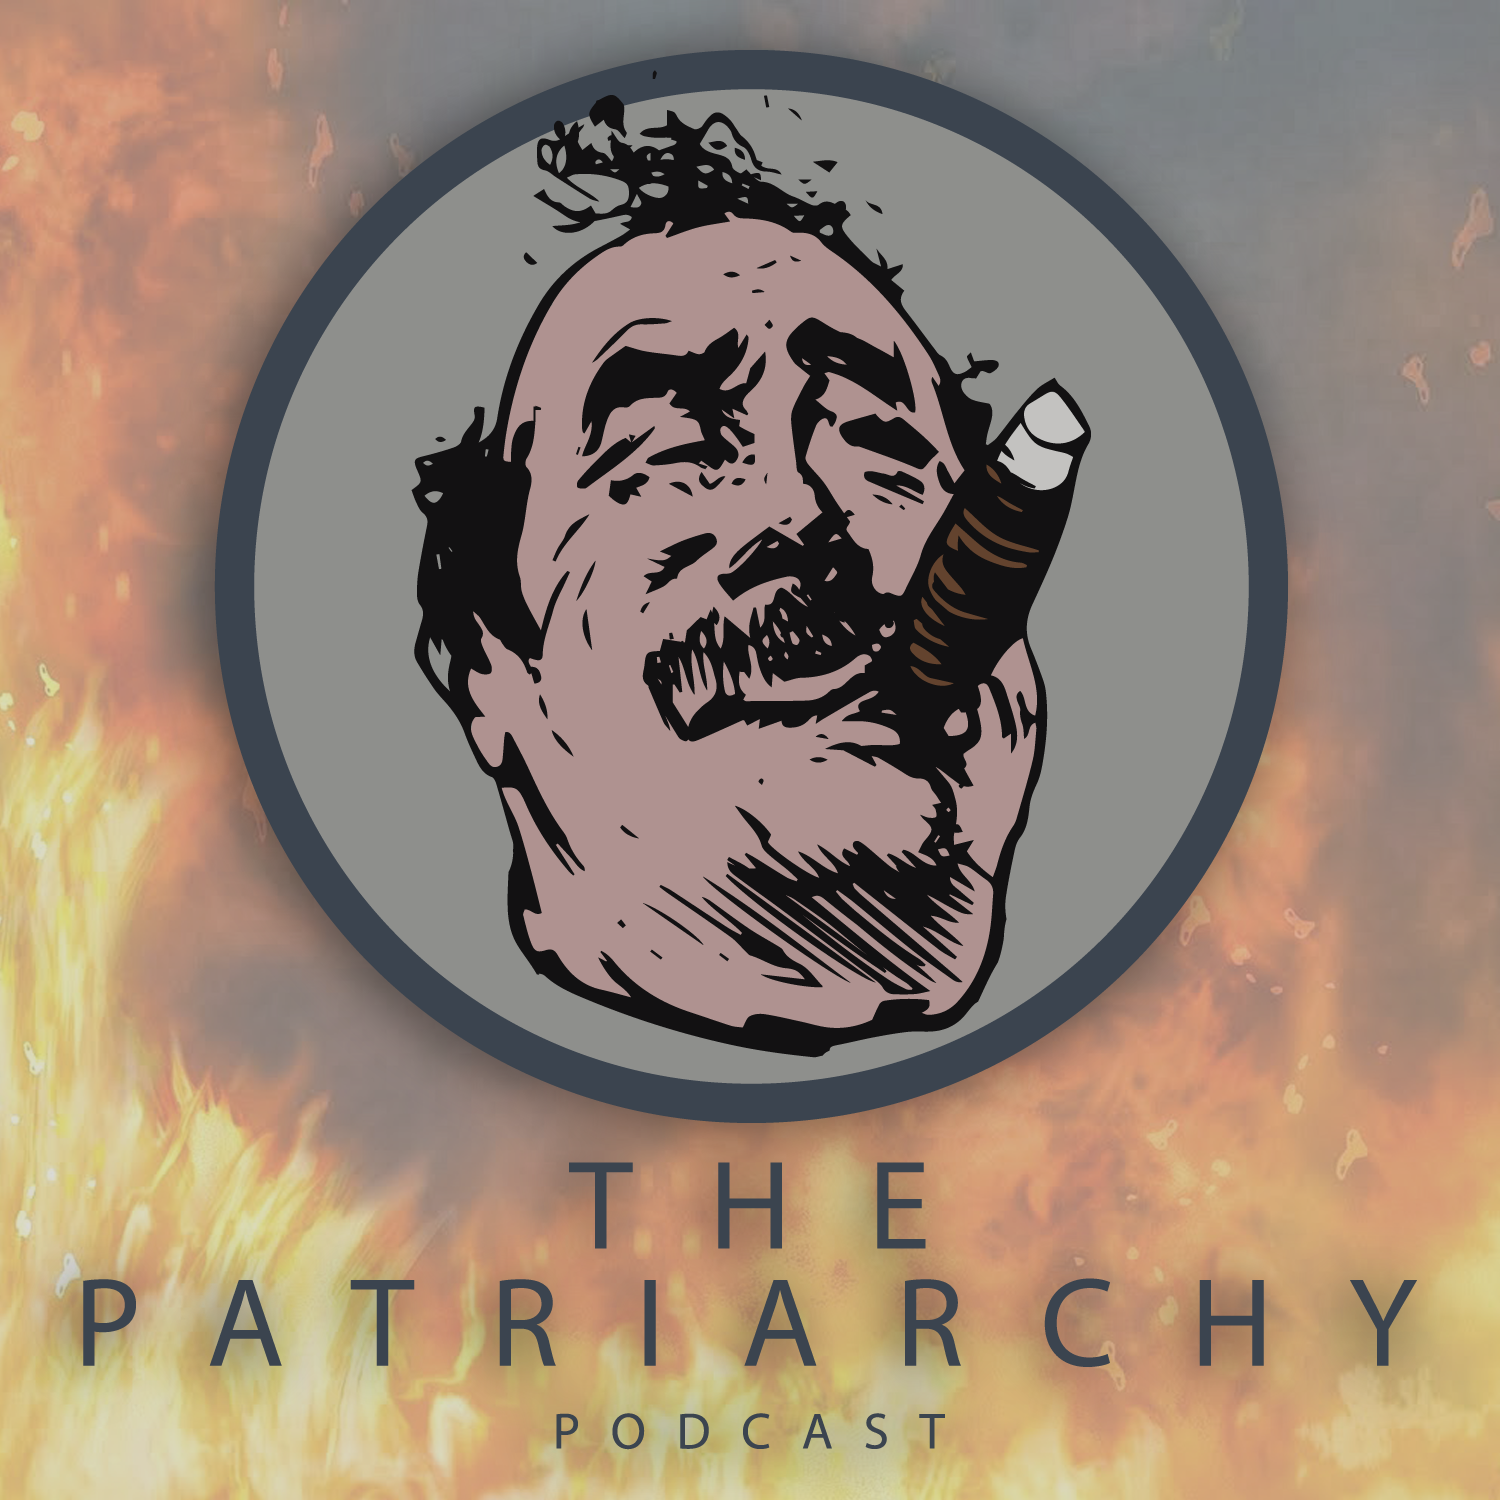 The Patriarchy Podcast: Fathers, Brothers, and Sons (Ep 38)